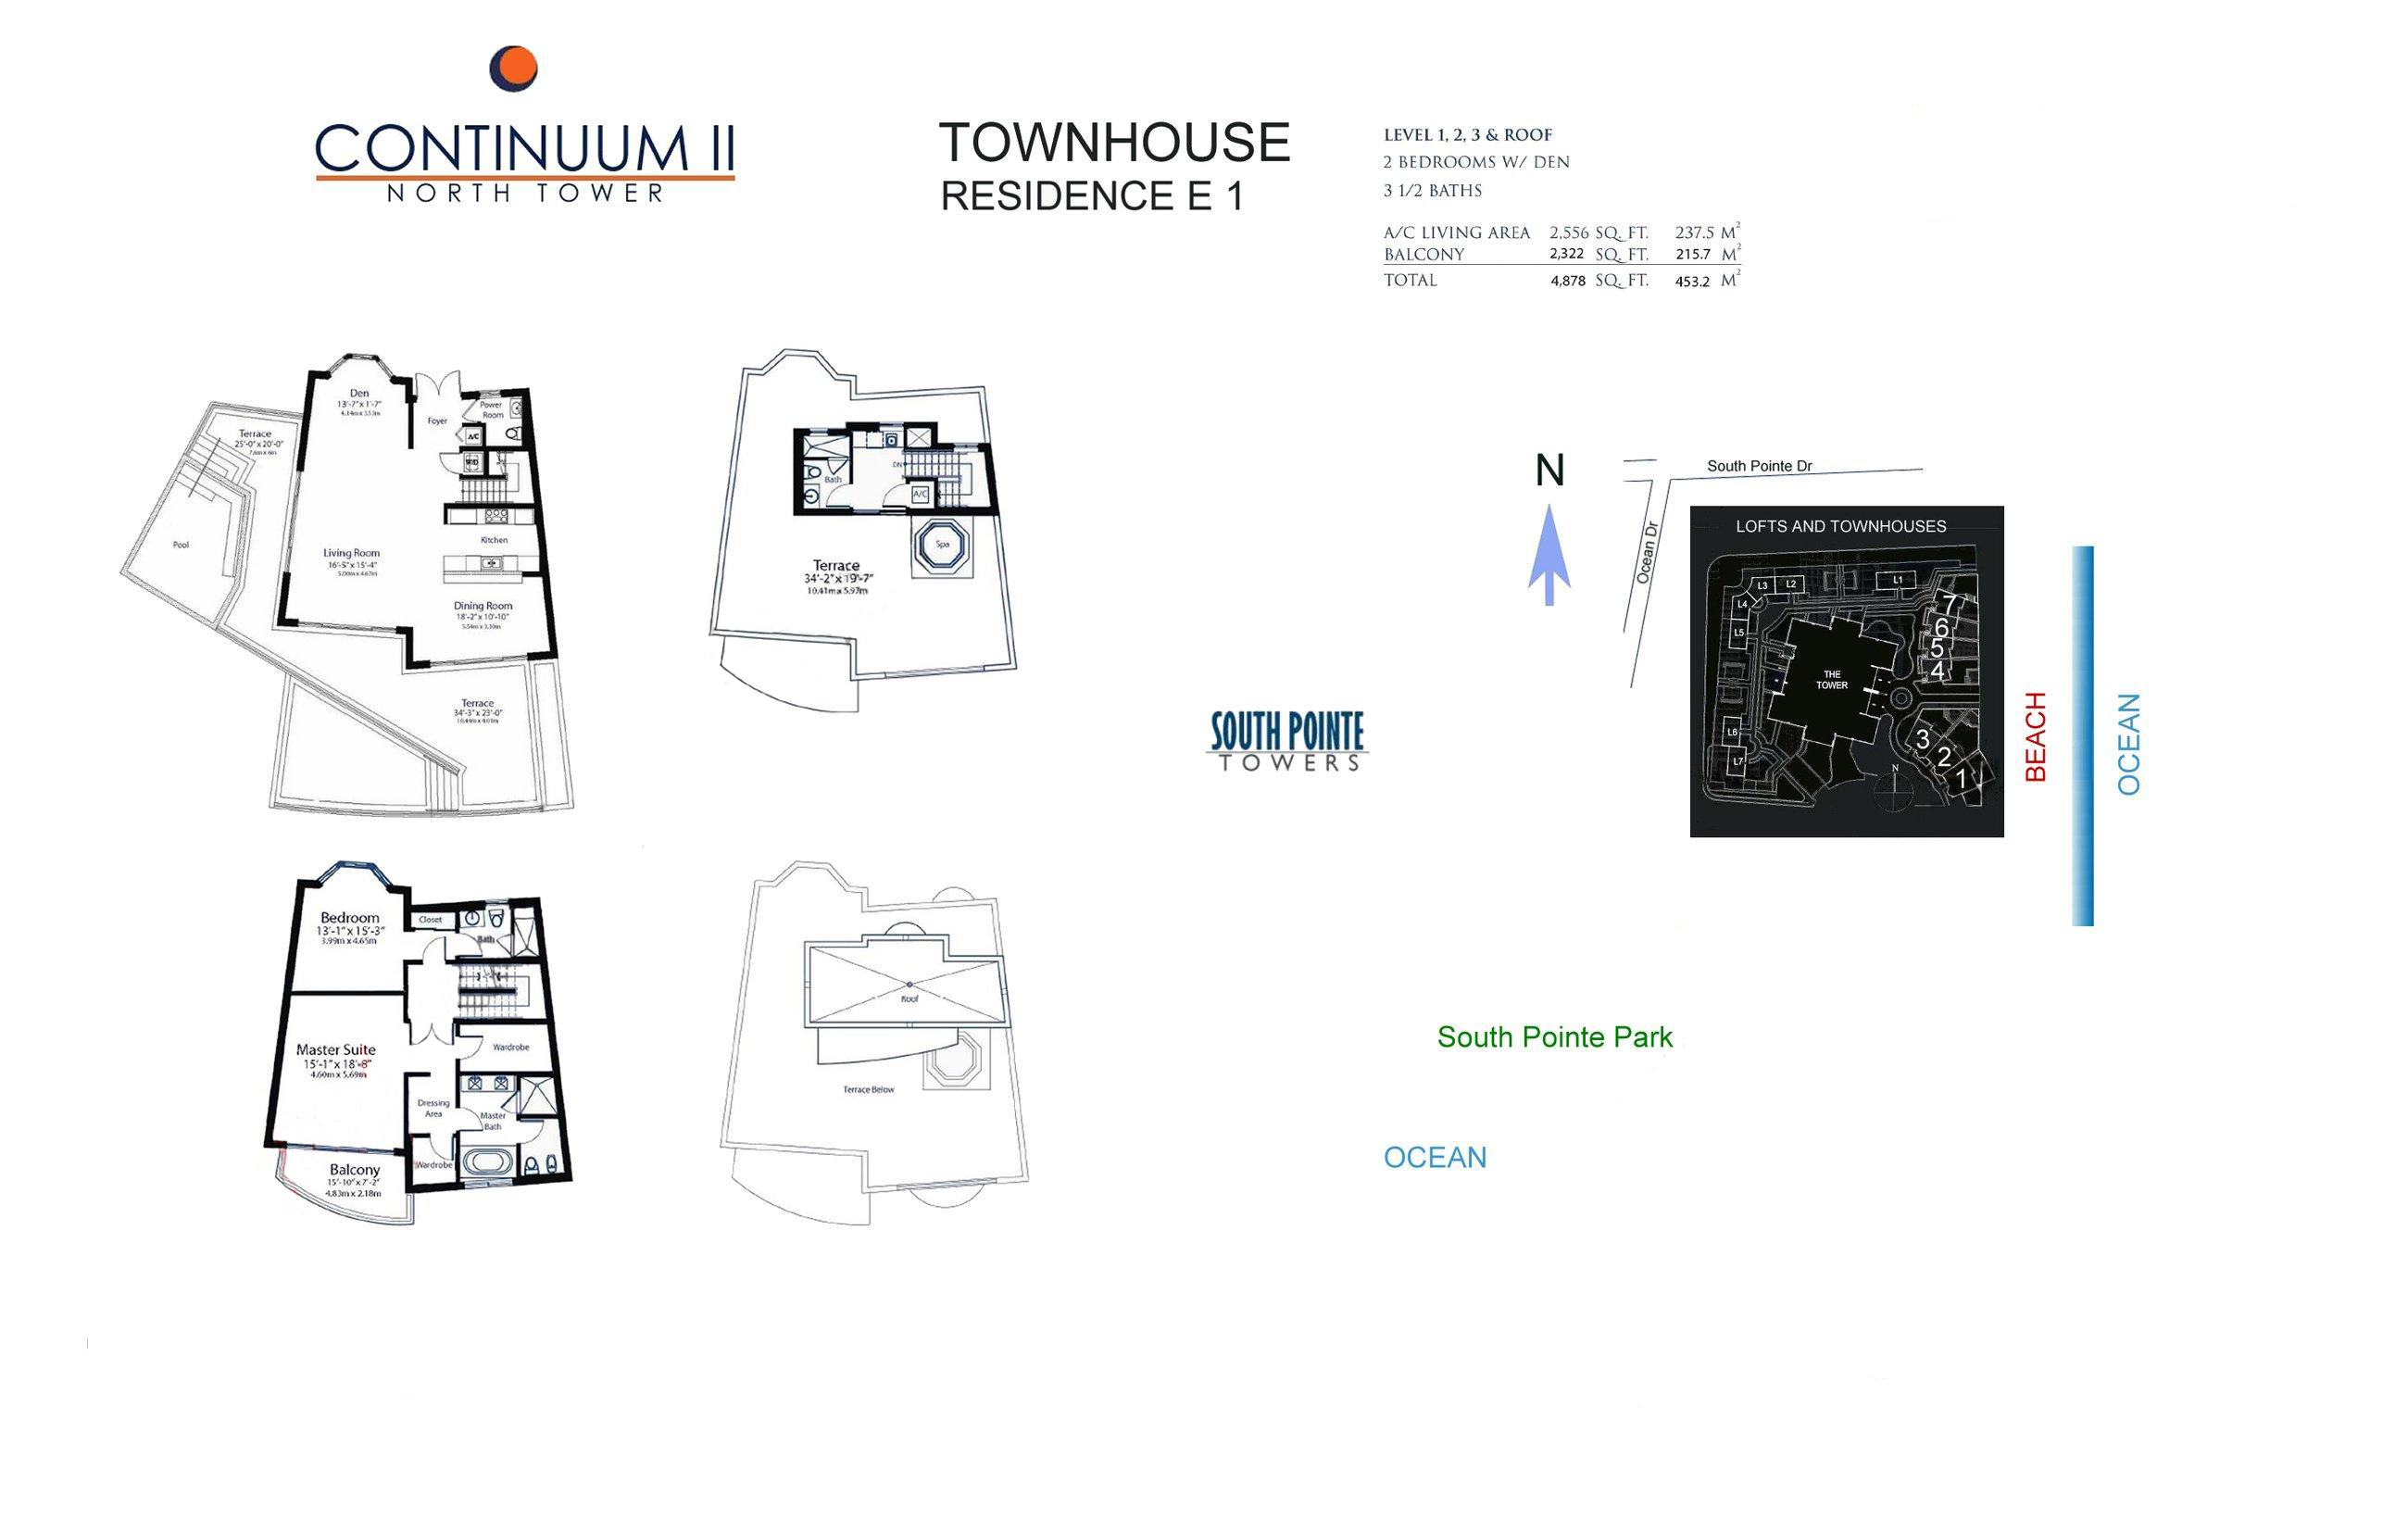 Continuum North Tower Townhouse Residence E1